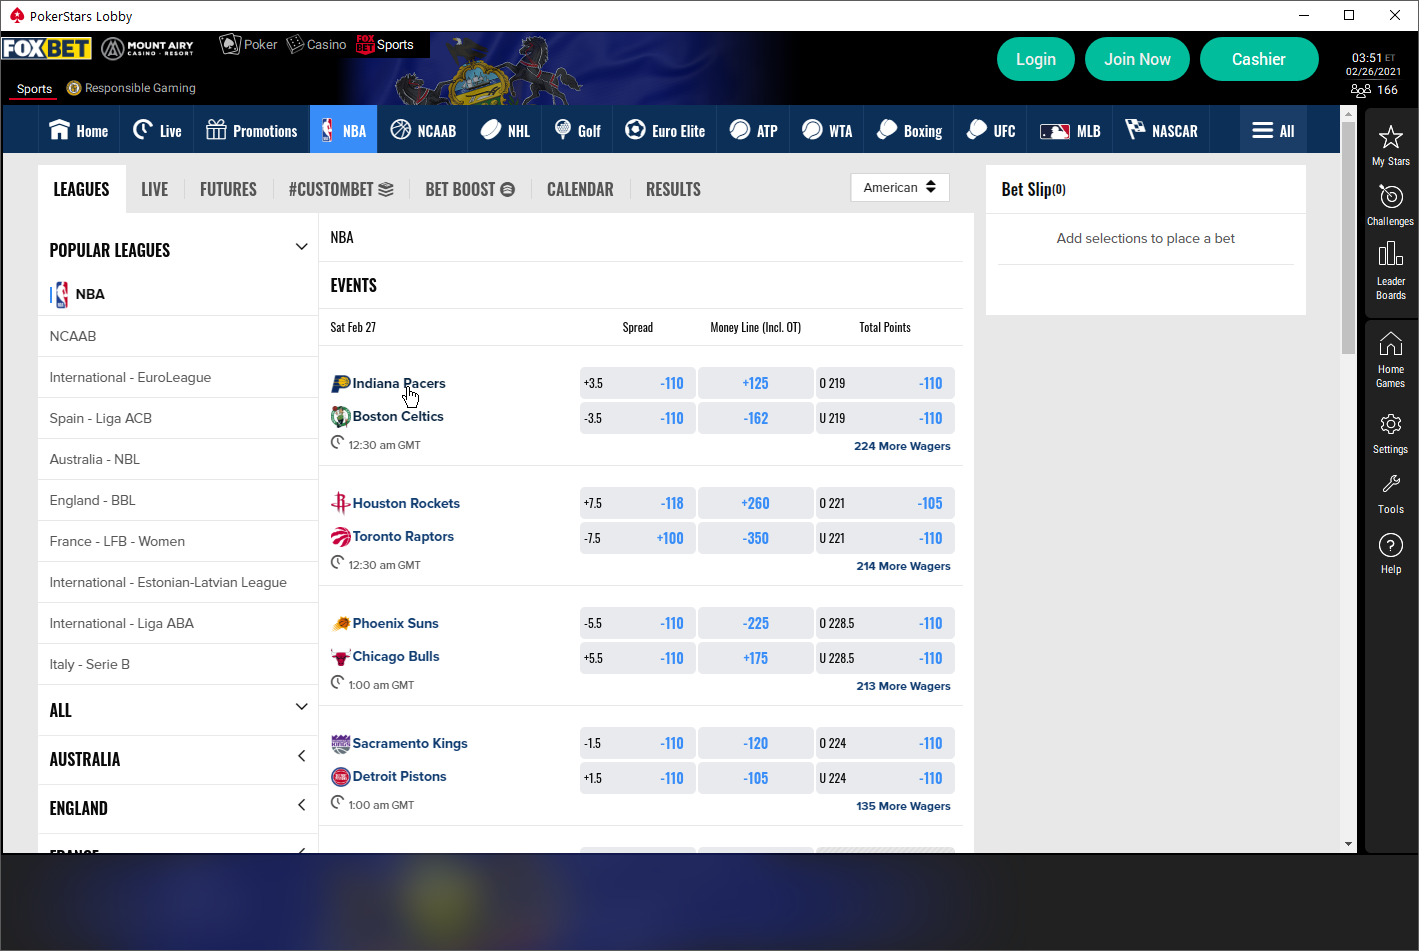 The Fox Bet sports book is available from an option in the top